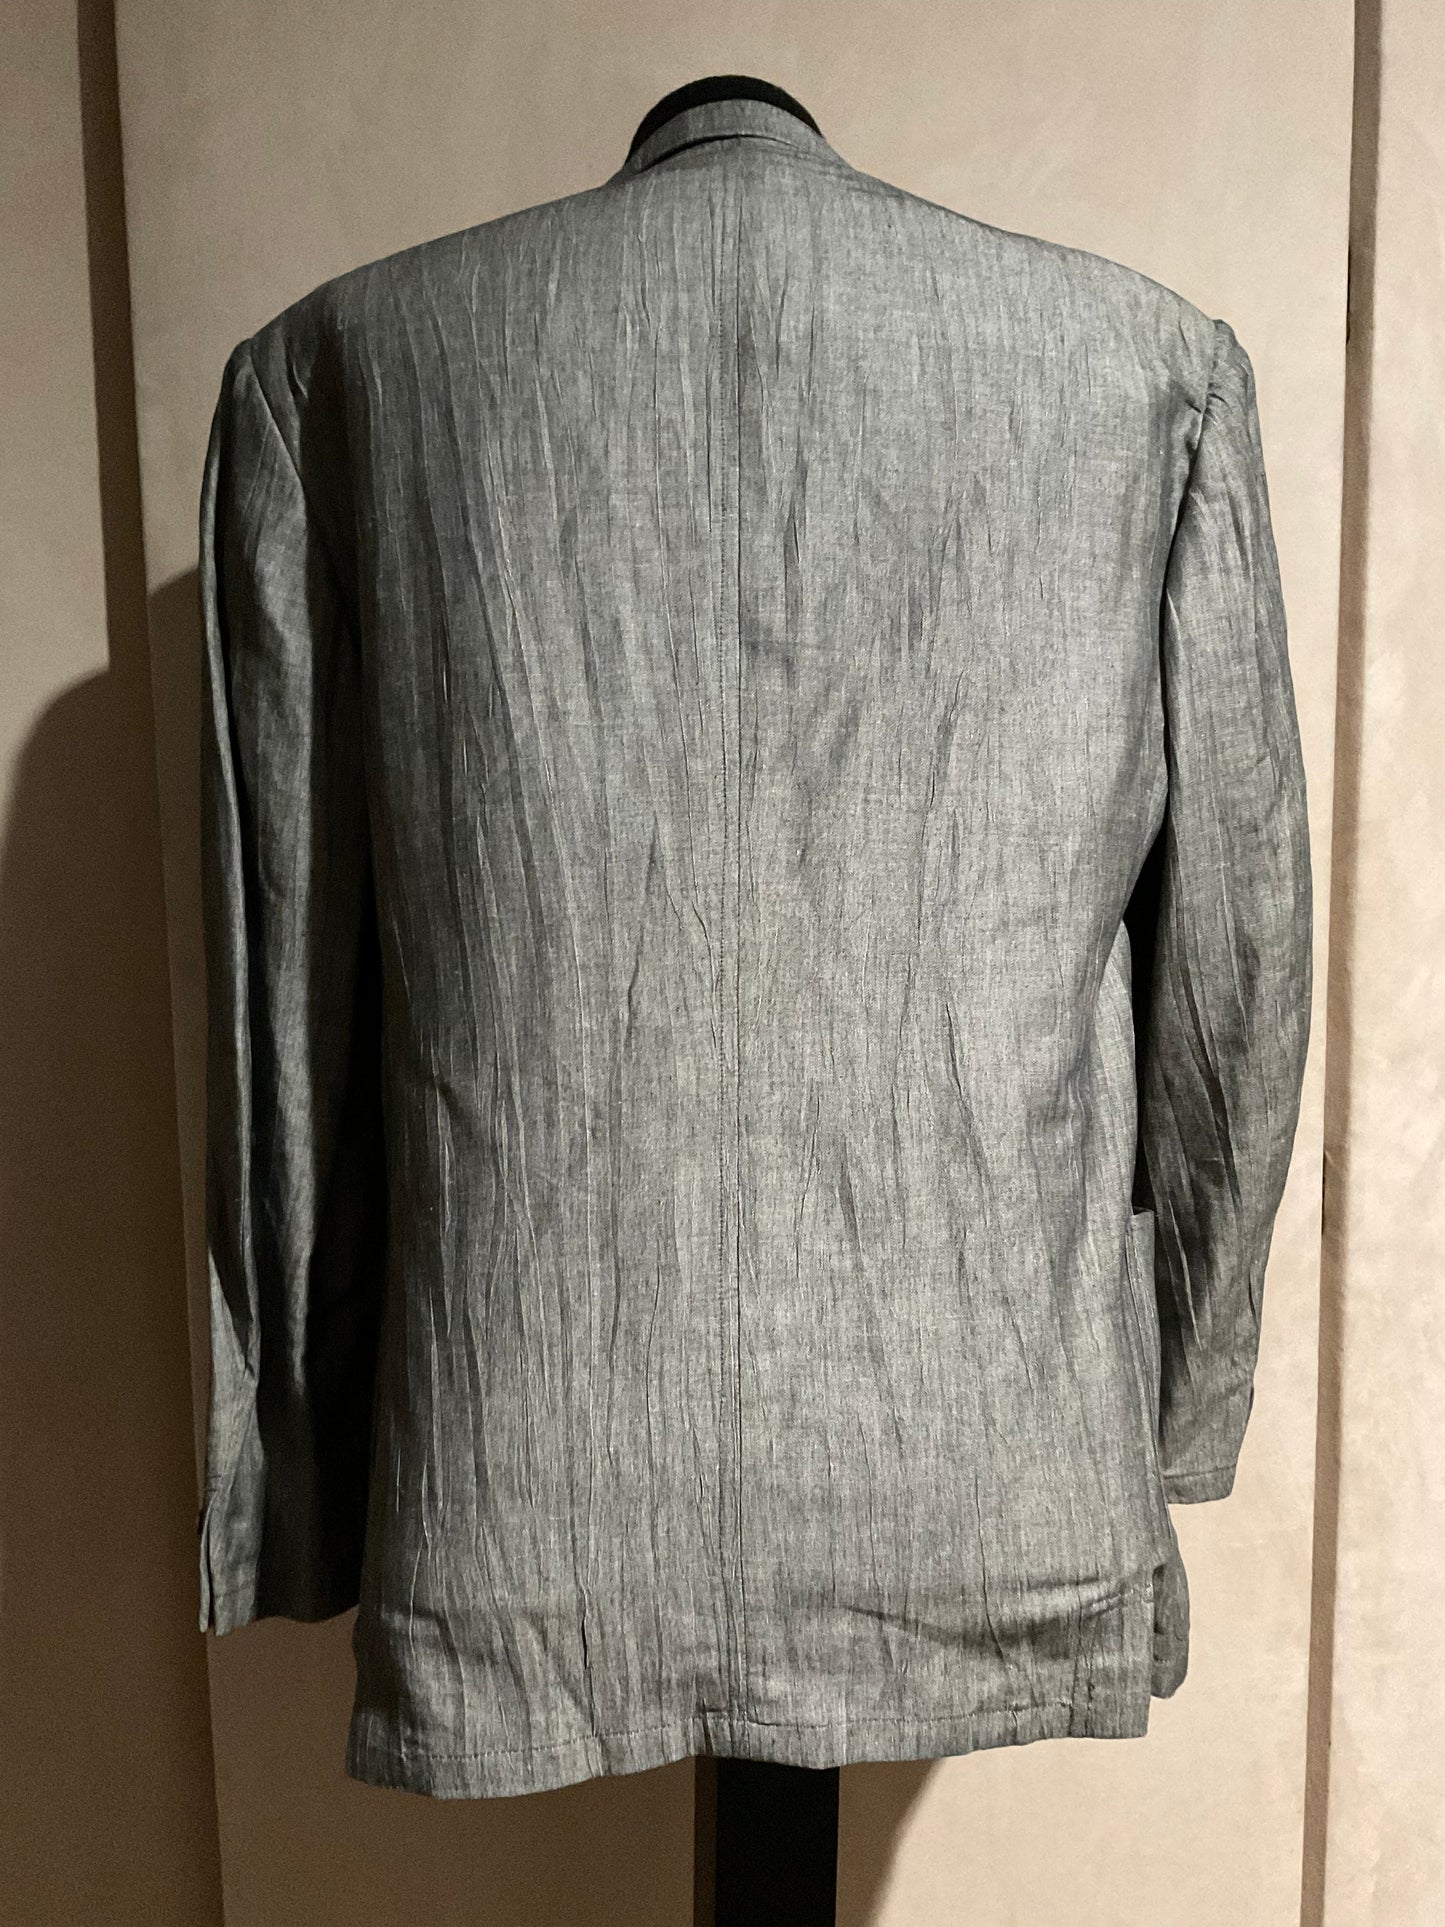 R P SPORT JACKET / GREY / LINEN & COTTON / UNCONSTRUCTED / 40 / NEW / MADE IN ITALY